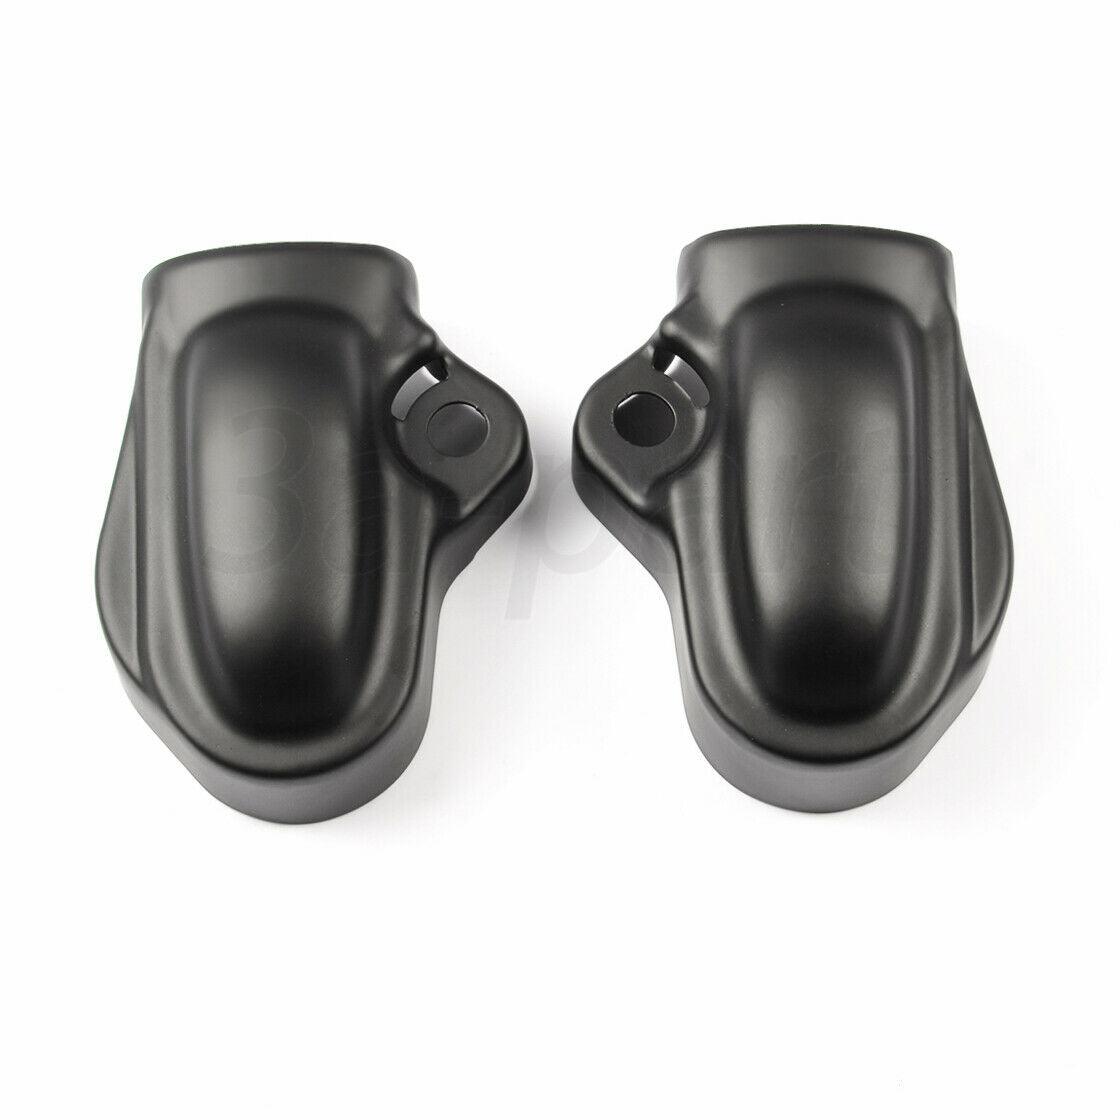 Rear Black Bar Shield Axle Nut Covers Fit for Harley V-Rod Muscle VRSCF 2002-17 - Moto Life Products